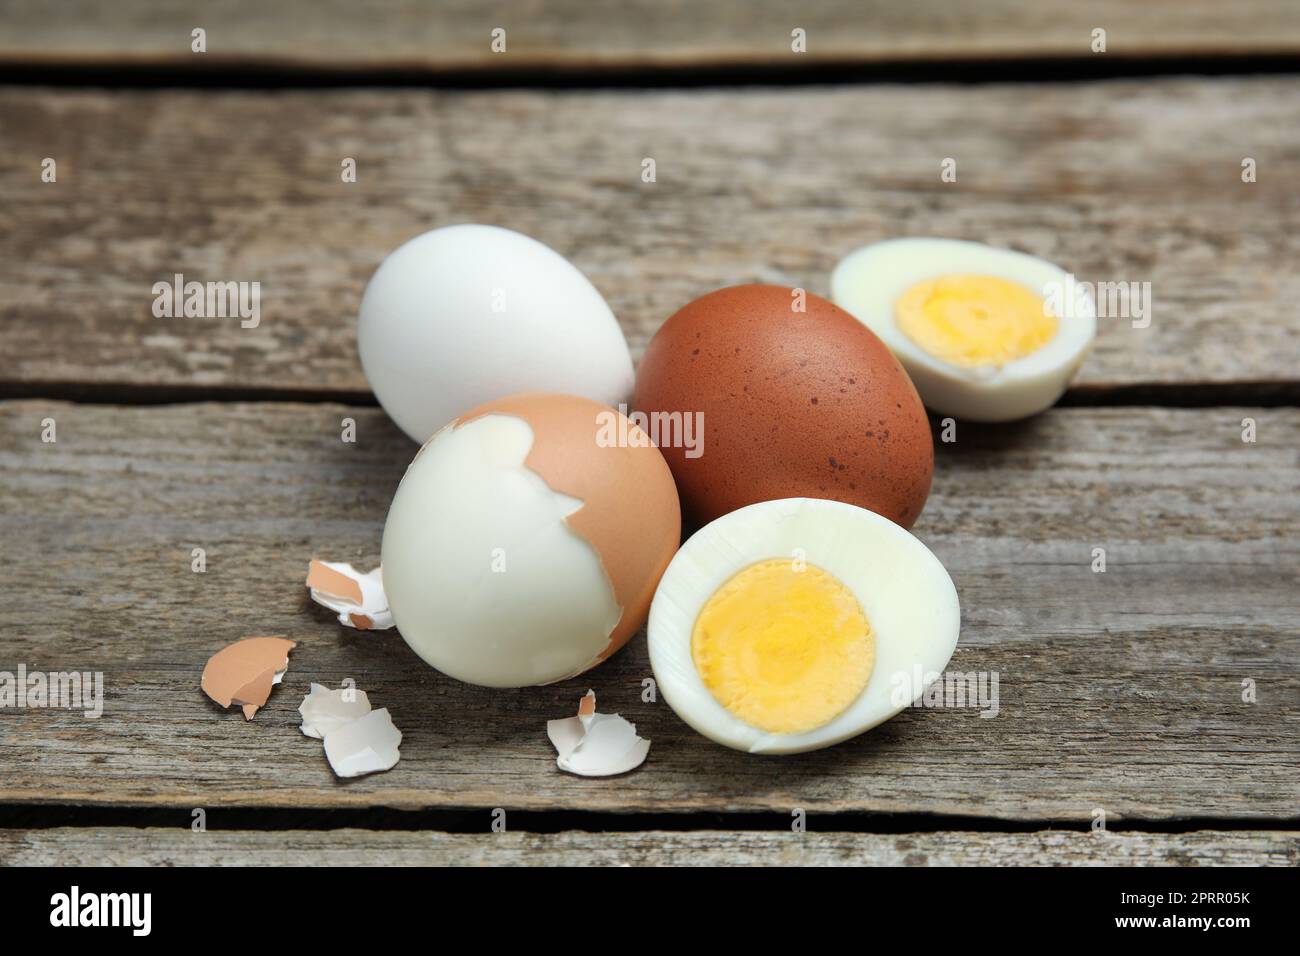 Hard boiled eggs and pieces of shell on wooden table Stock Photo